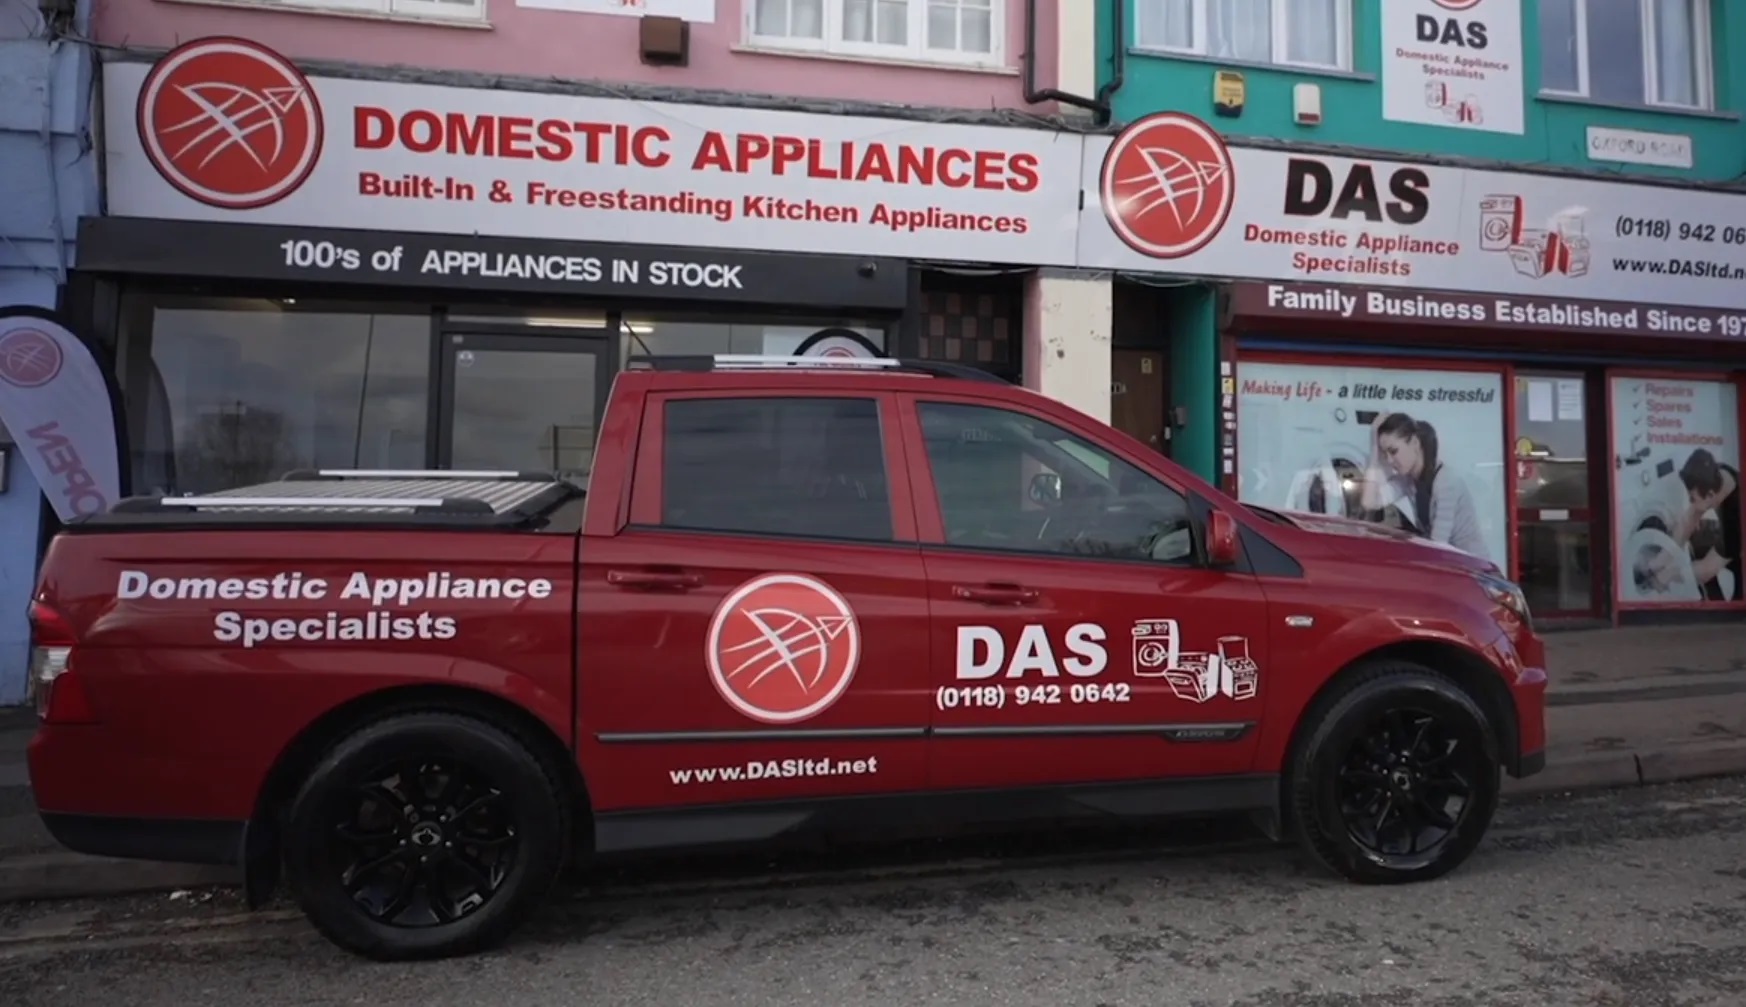 Shop front and truck in company livery.